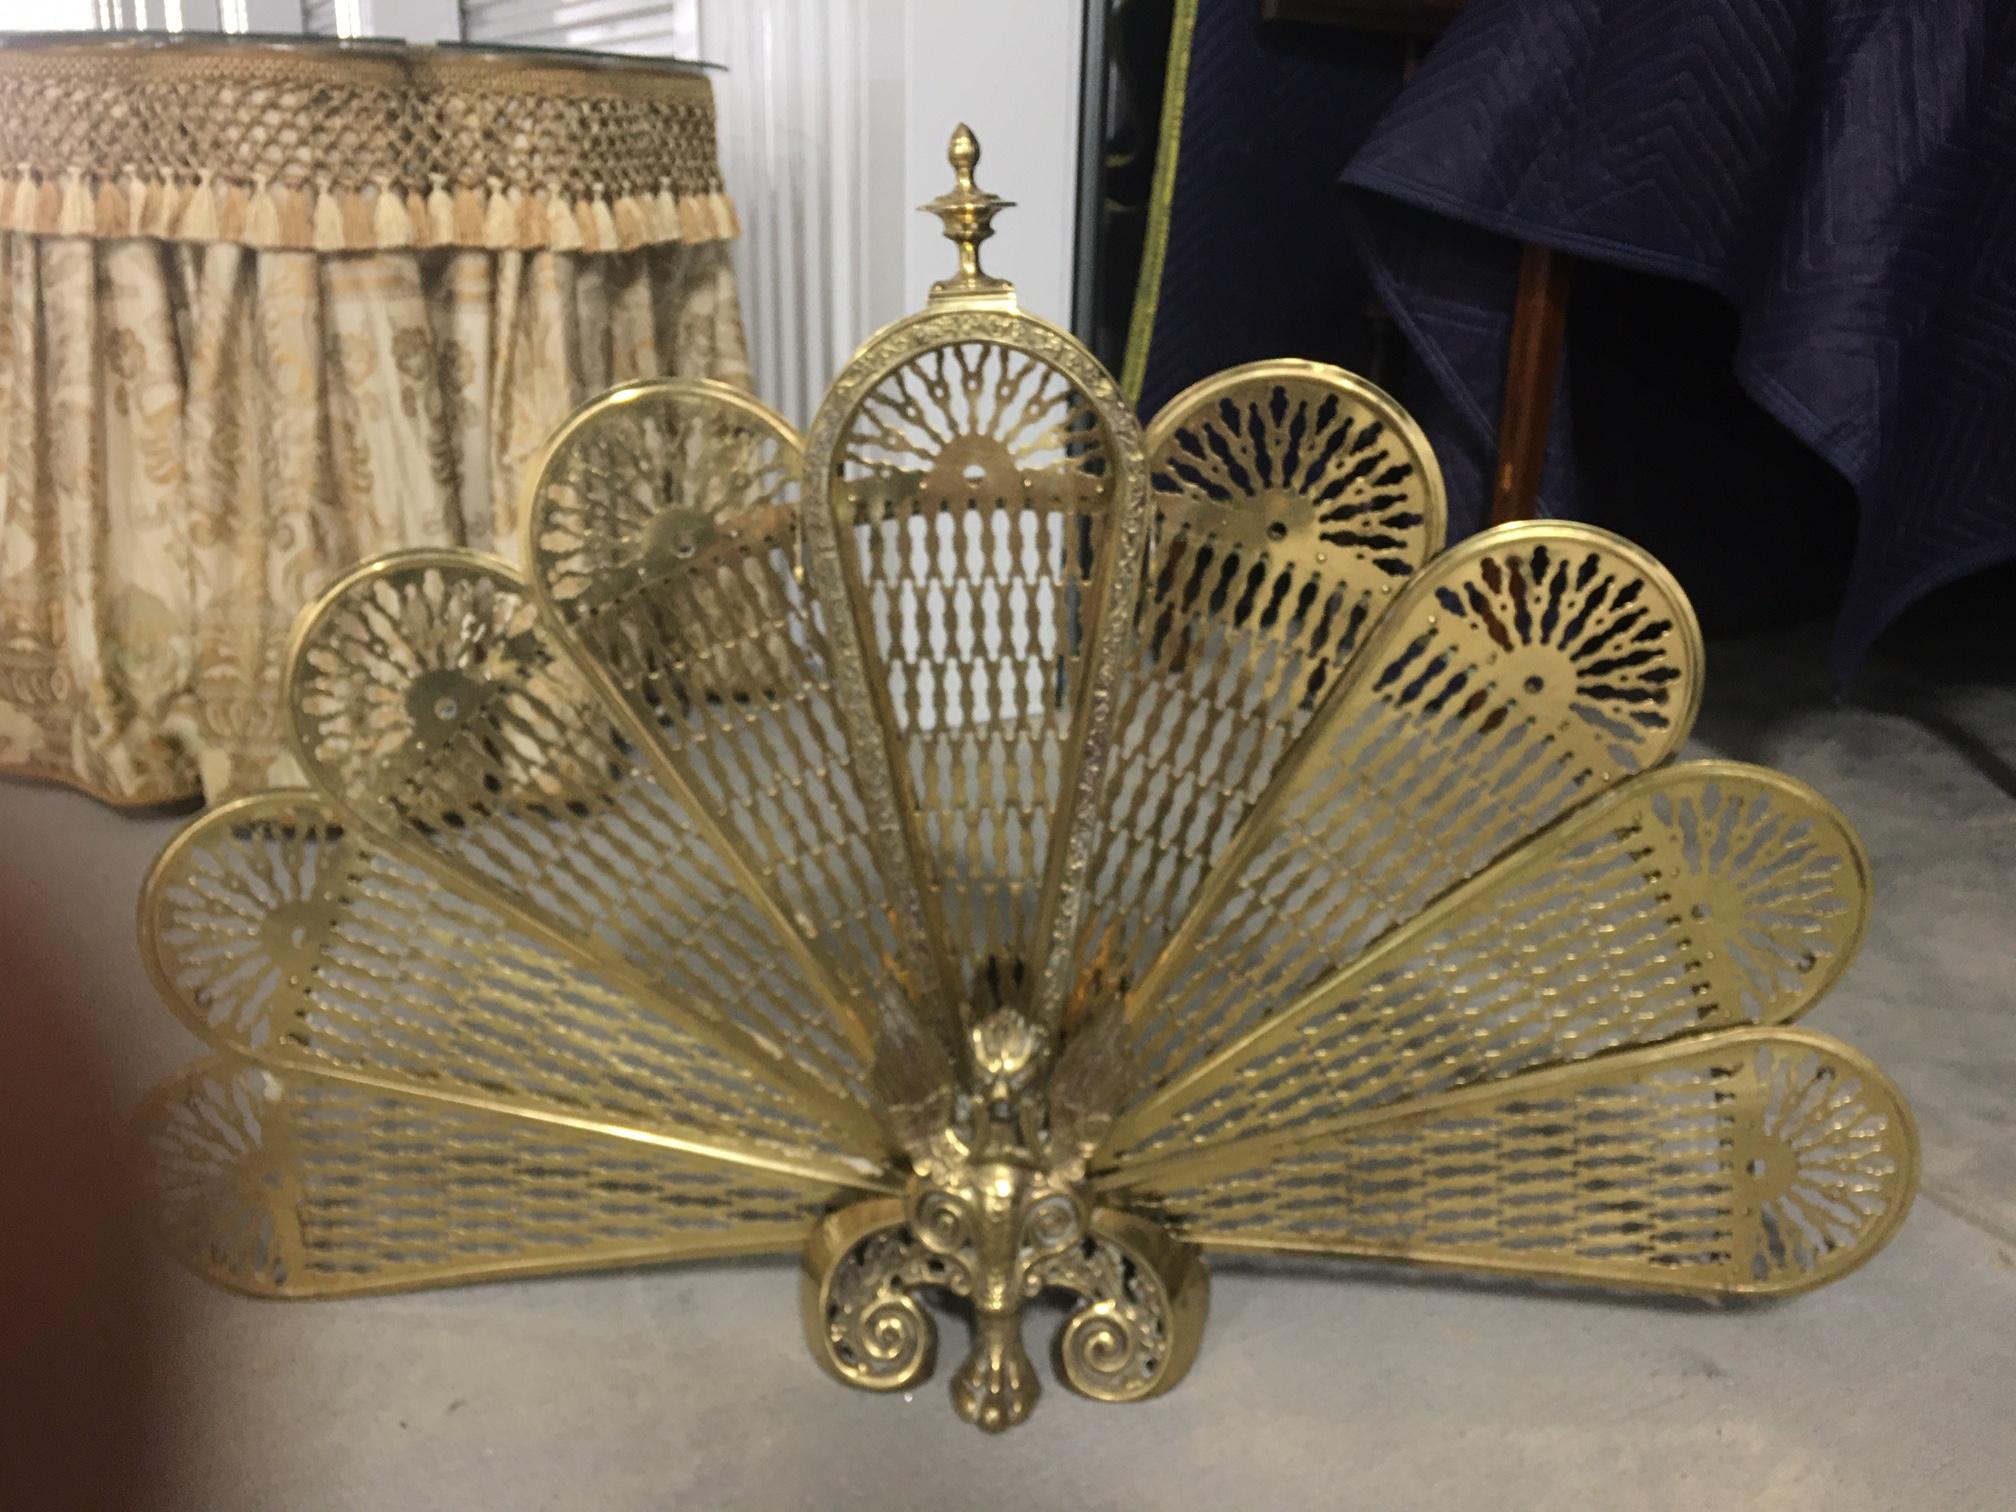 Brass Fan Screen with a Decorative Finial, 19th Century 4